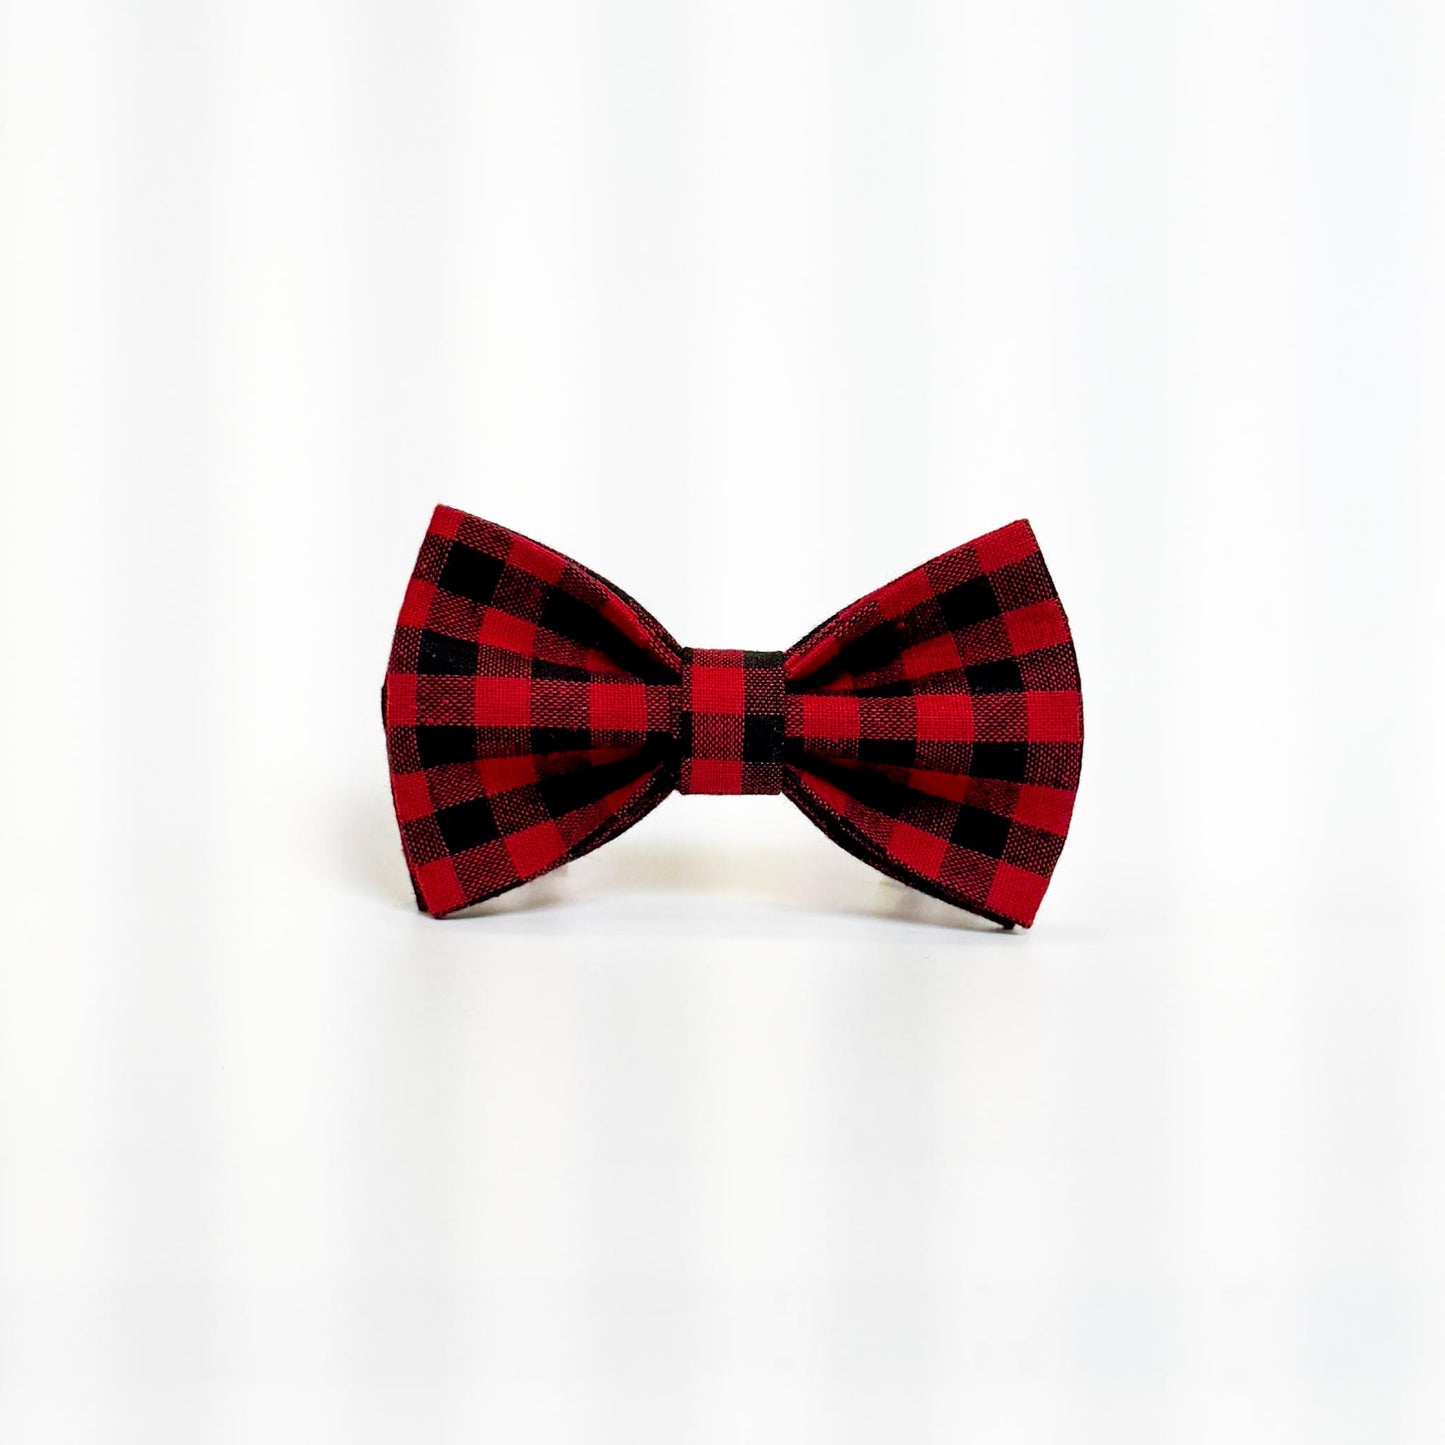 The Lumberjack Bow Tie - Sam and Dot